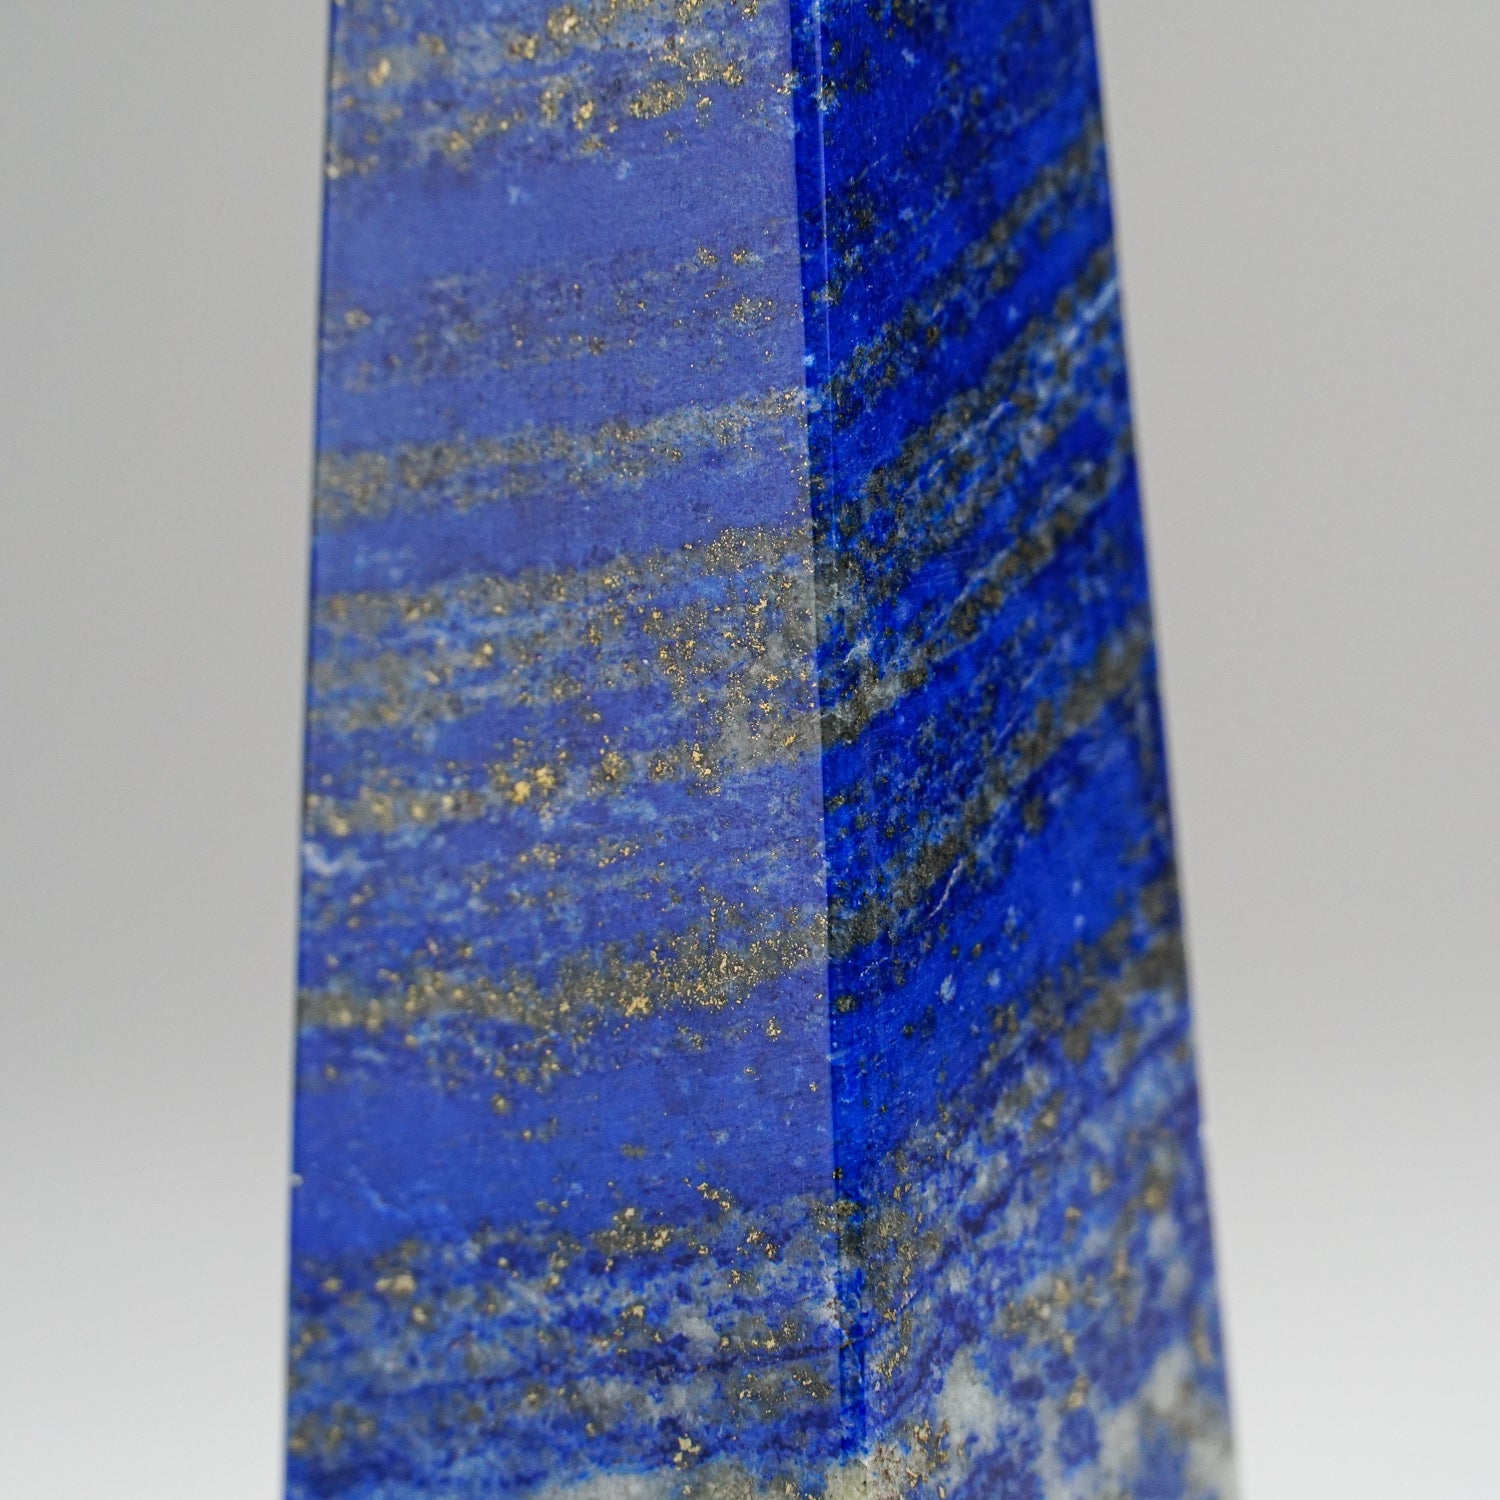 Polished Lapis Lazuli Point from Afghanistan (221.2 grams)